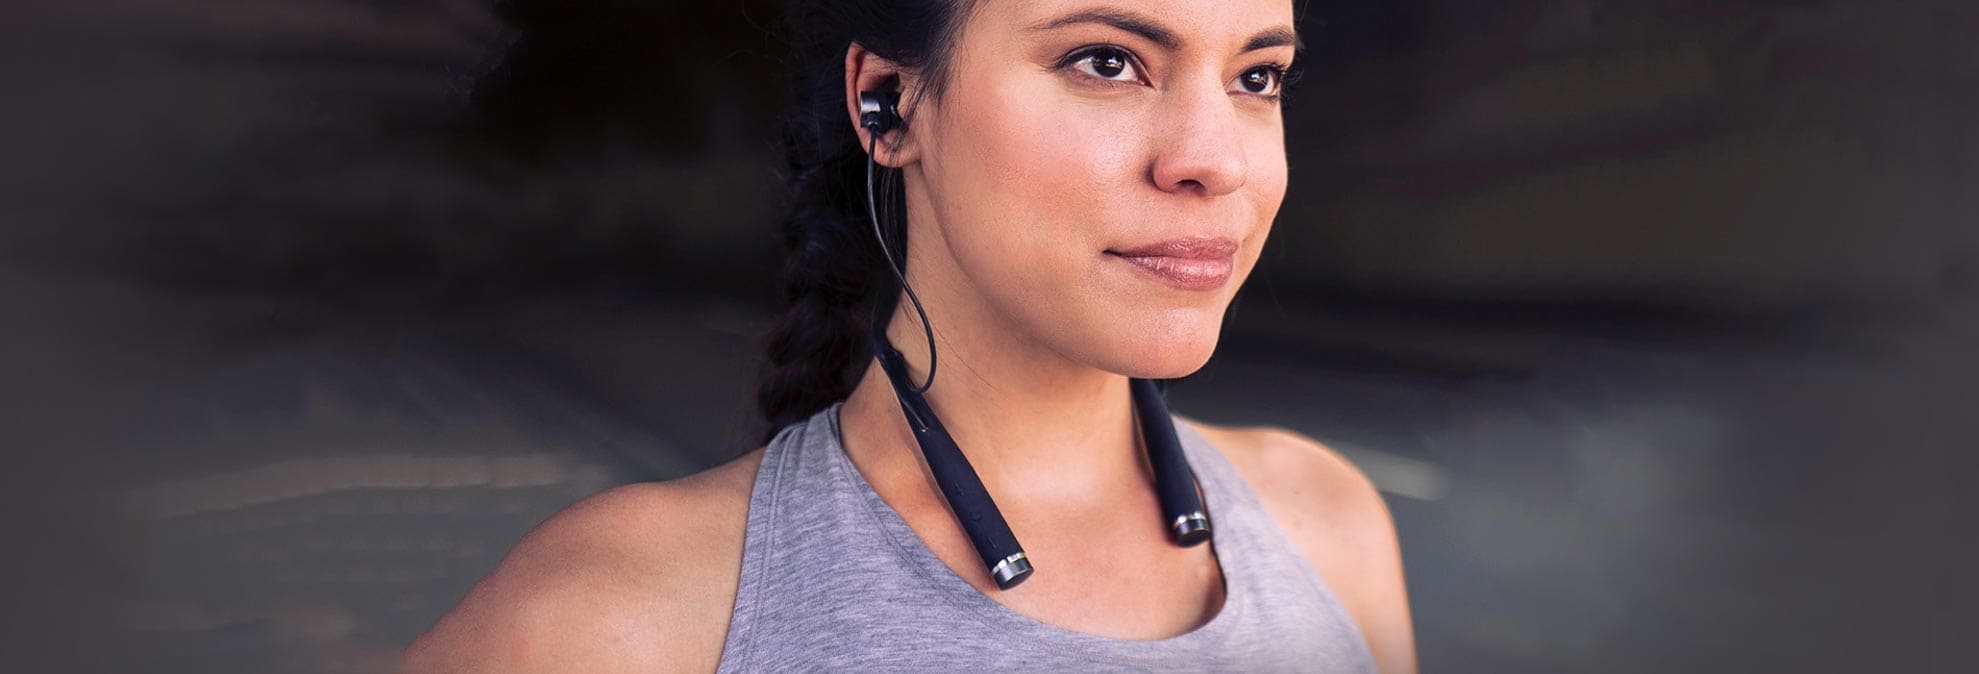 Vi Headphones for Runners Review | AI - Consumer Reports